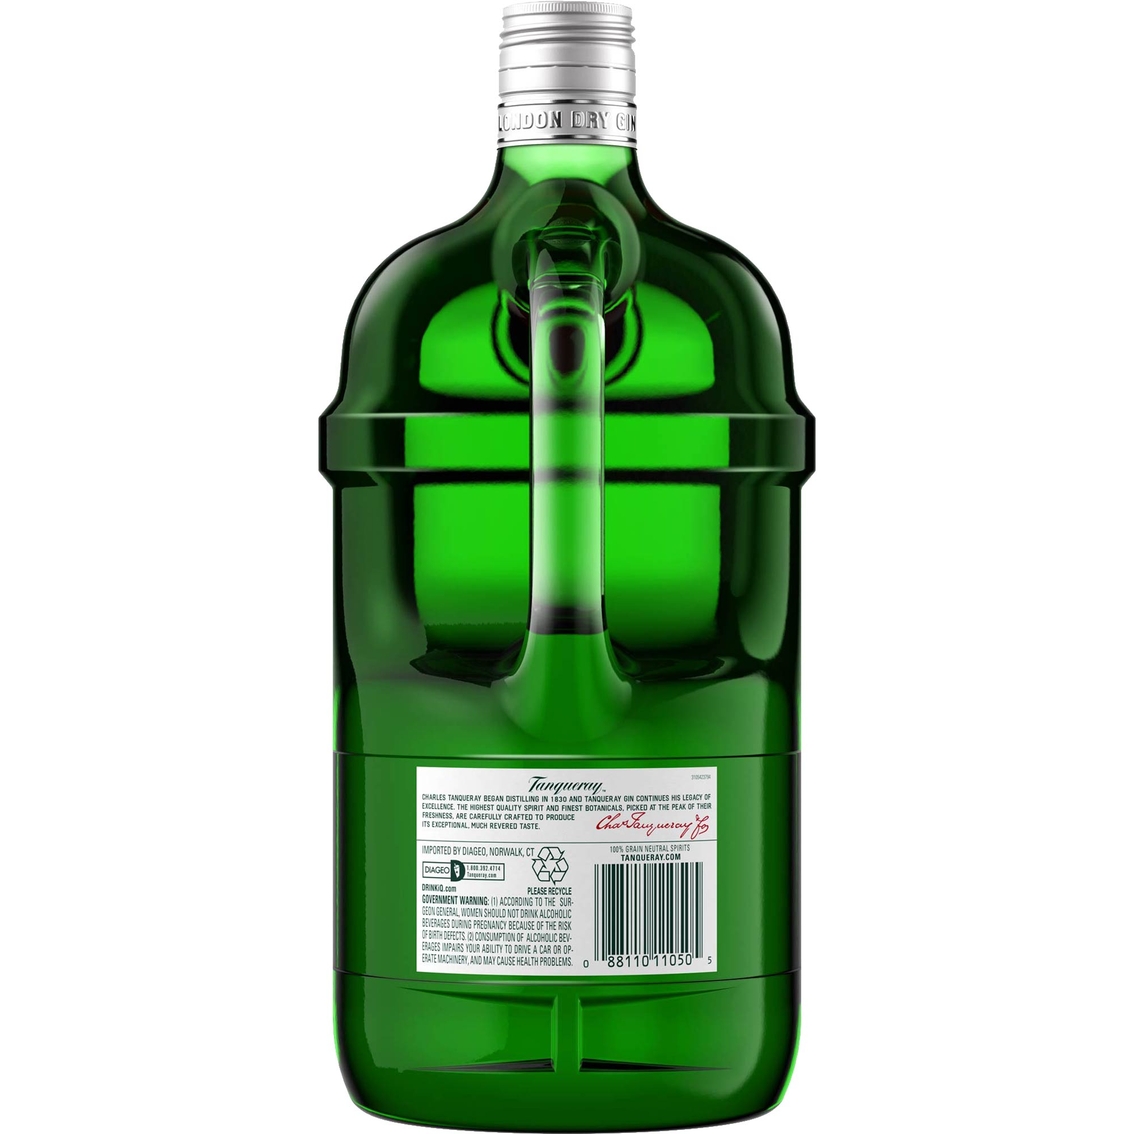 Tanqueray Gin 1.75L - Image 2 of 2